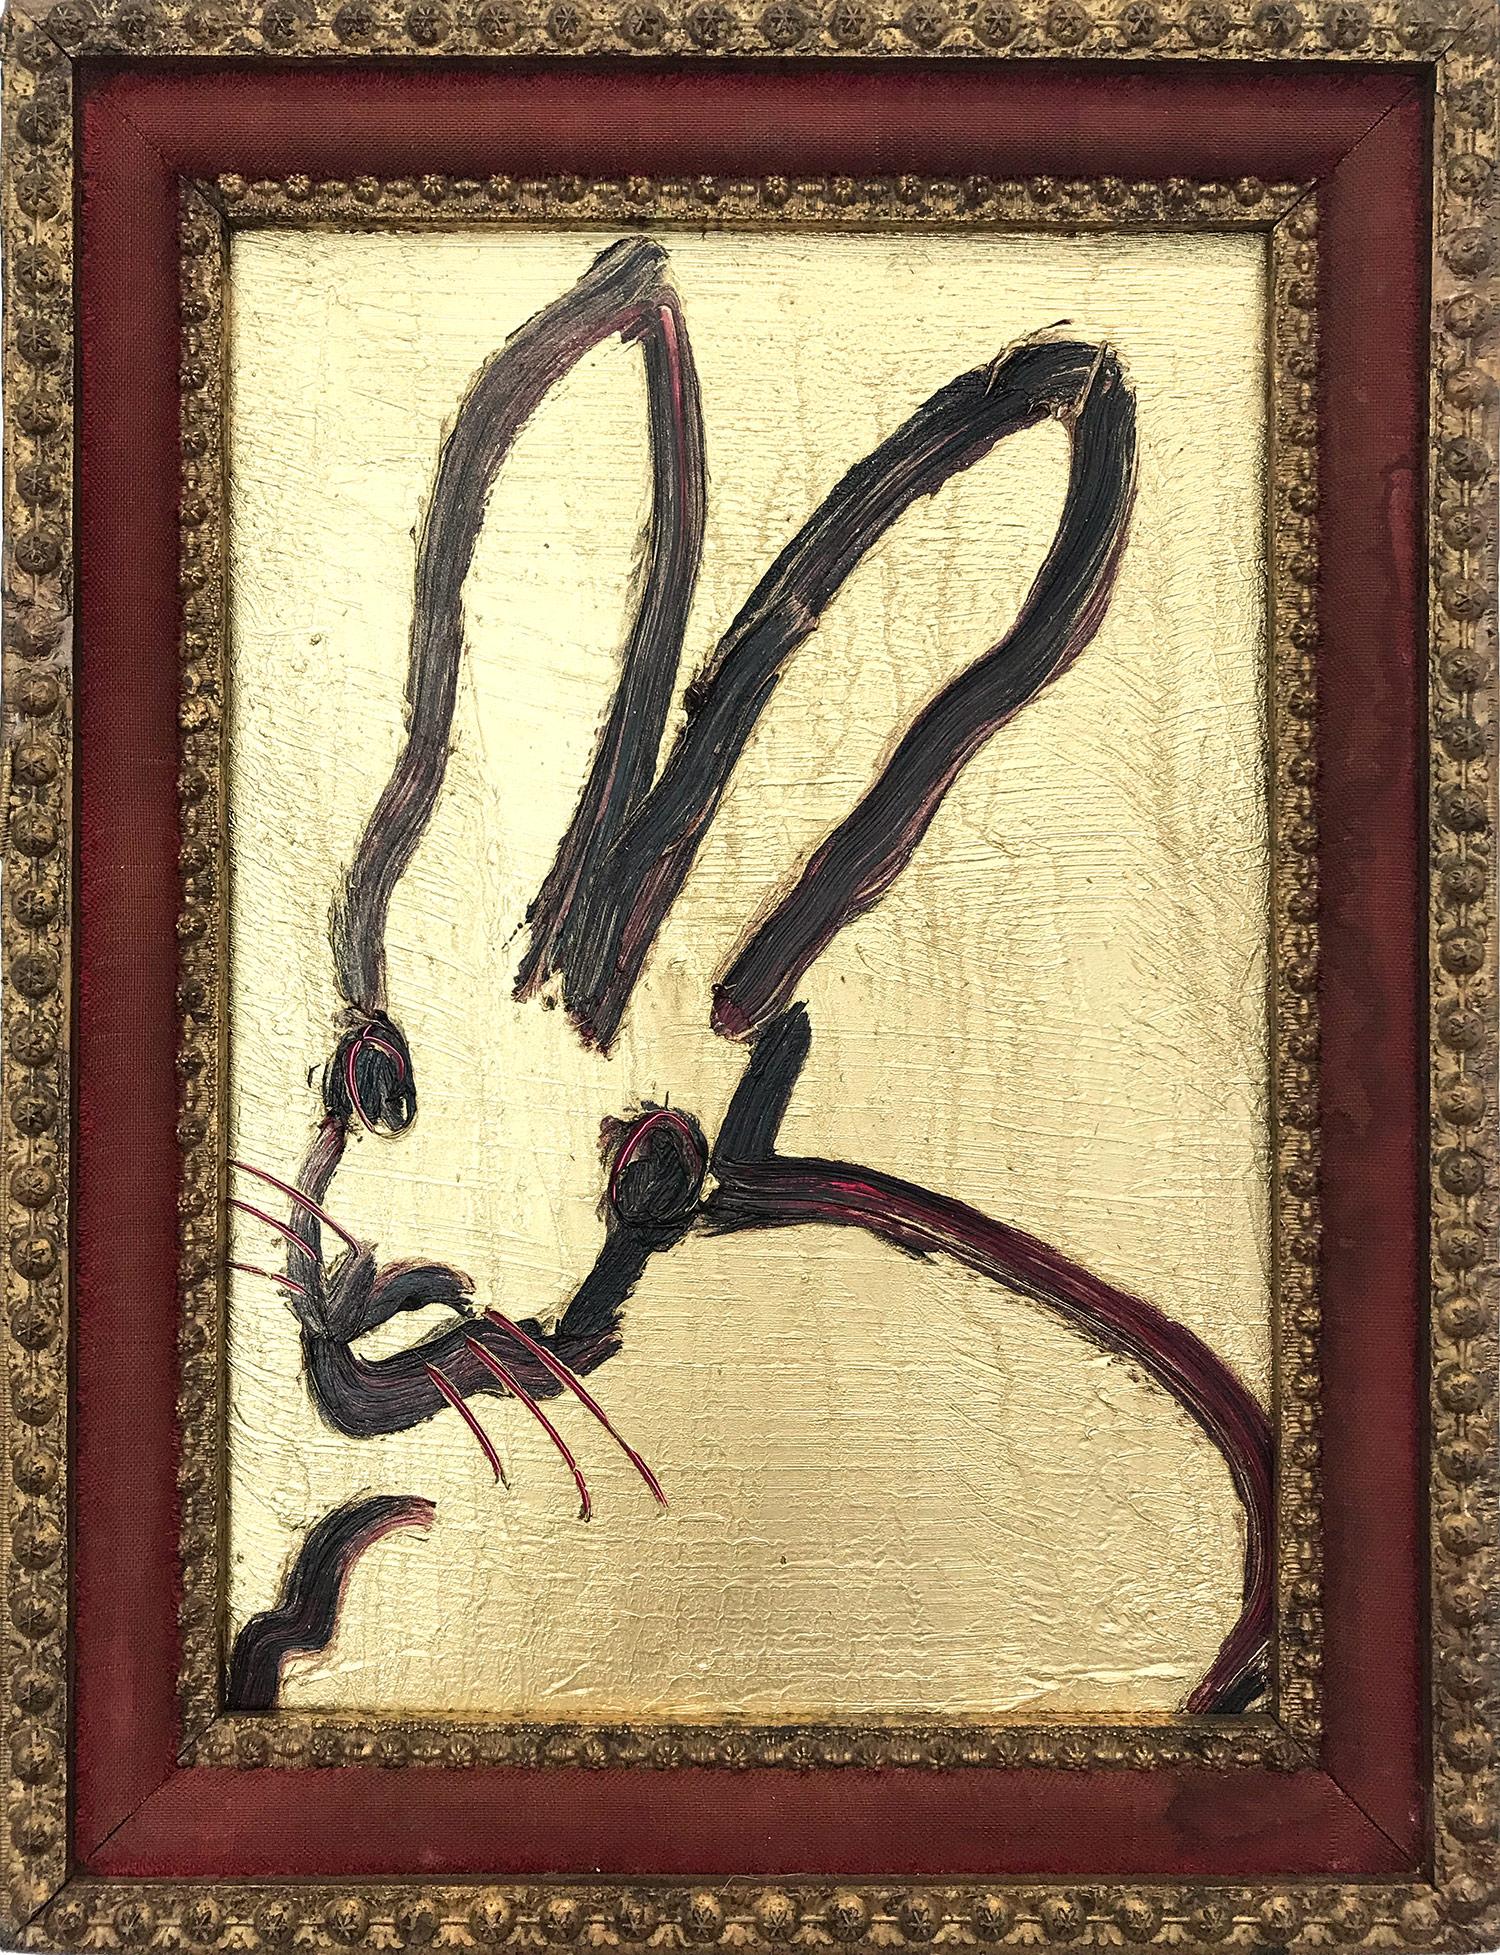 Hunt Slonem Abstract Painting - "Untitled" (Black Bunny on Gold with Ruby Red accents) Oil Paint on Wood Panel